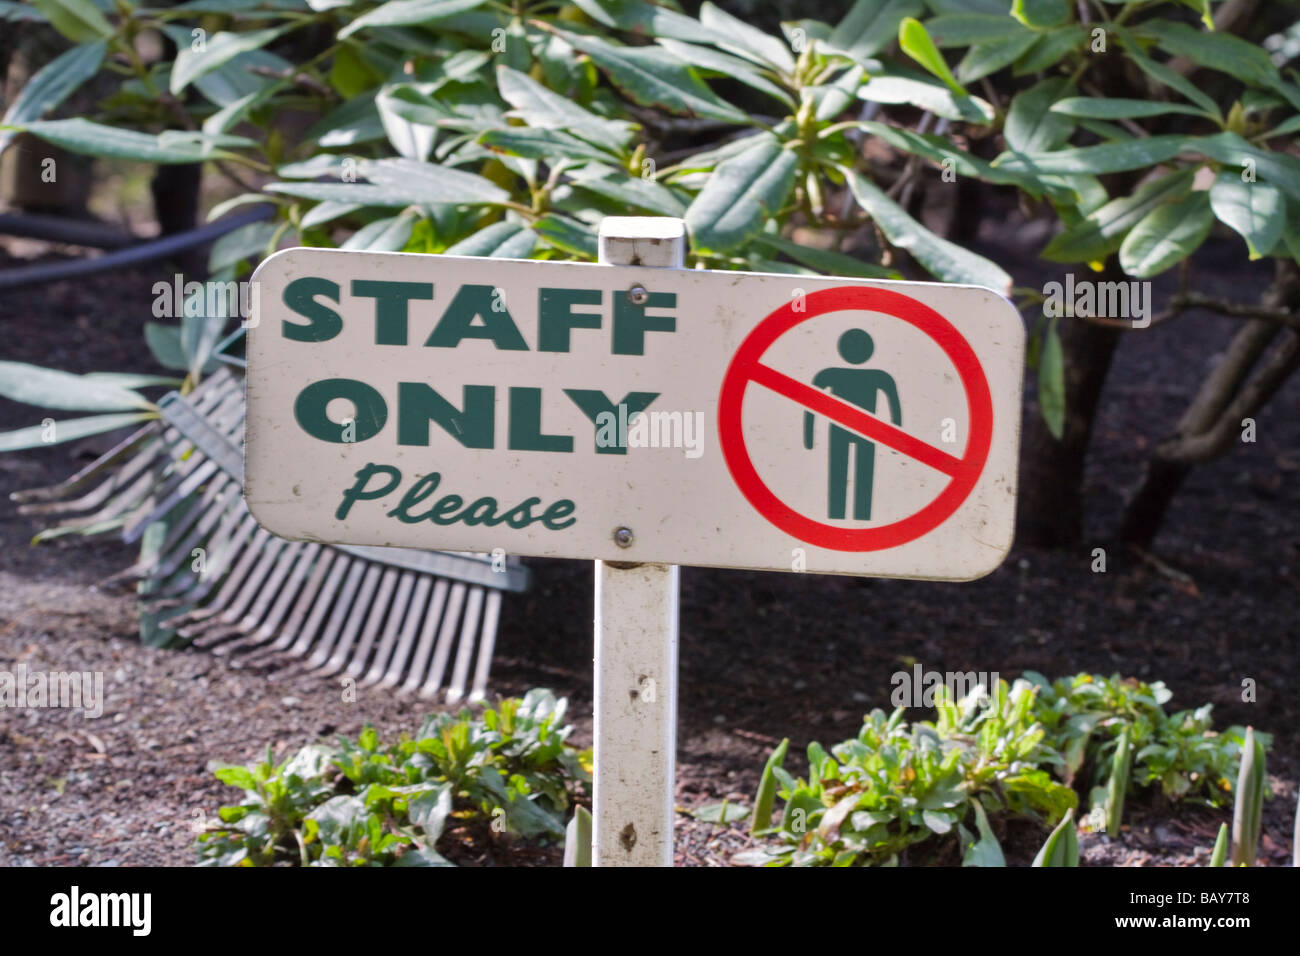 Staff Only Please sign Stock Photo